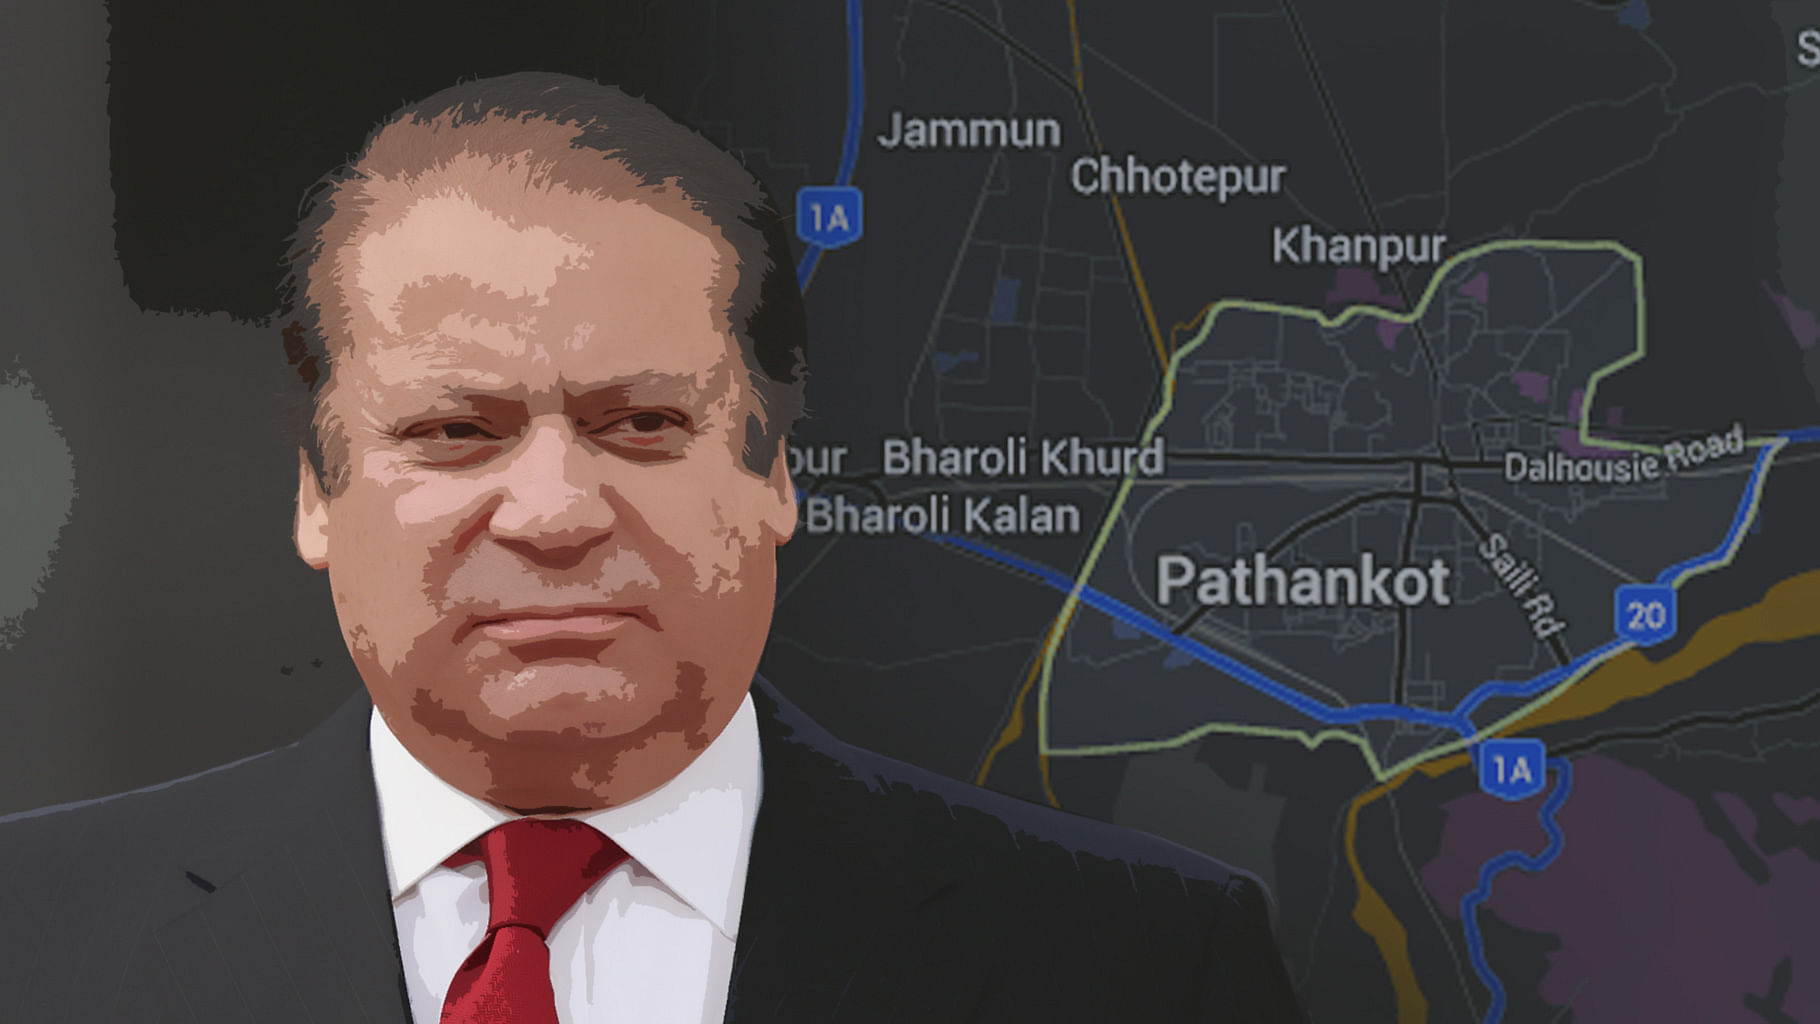 Nawaz Sharif’s posture and his promptness in speaking to the Indian prime minister clearly give out the tension between him and  the Pakistani Army. (Photo: <b>The Quint</b>)